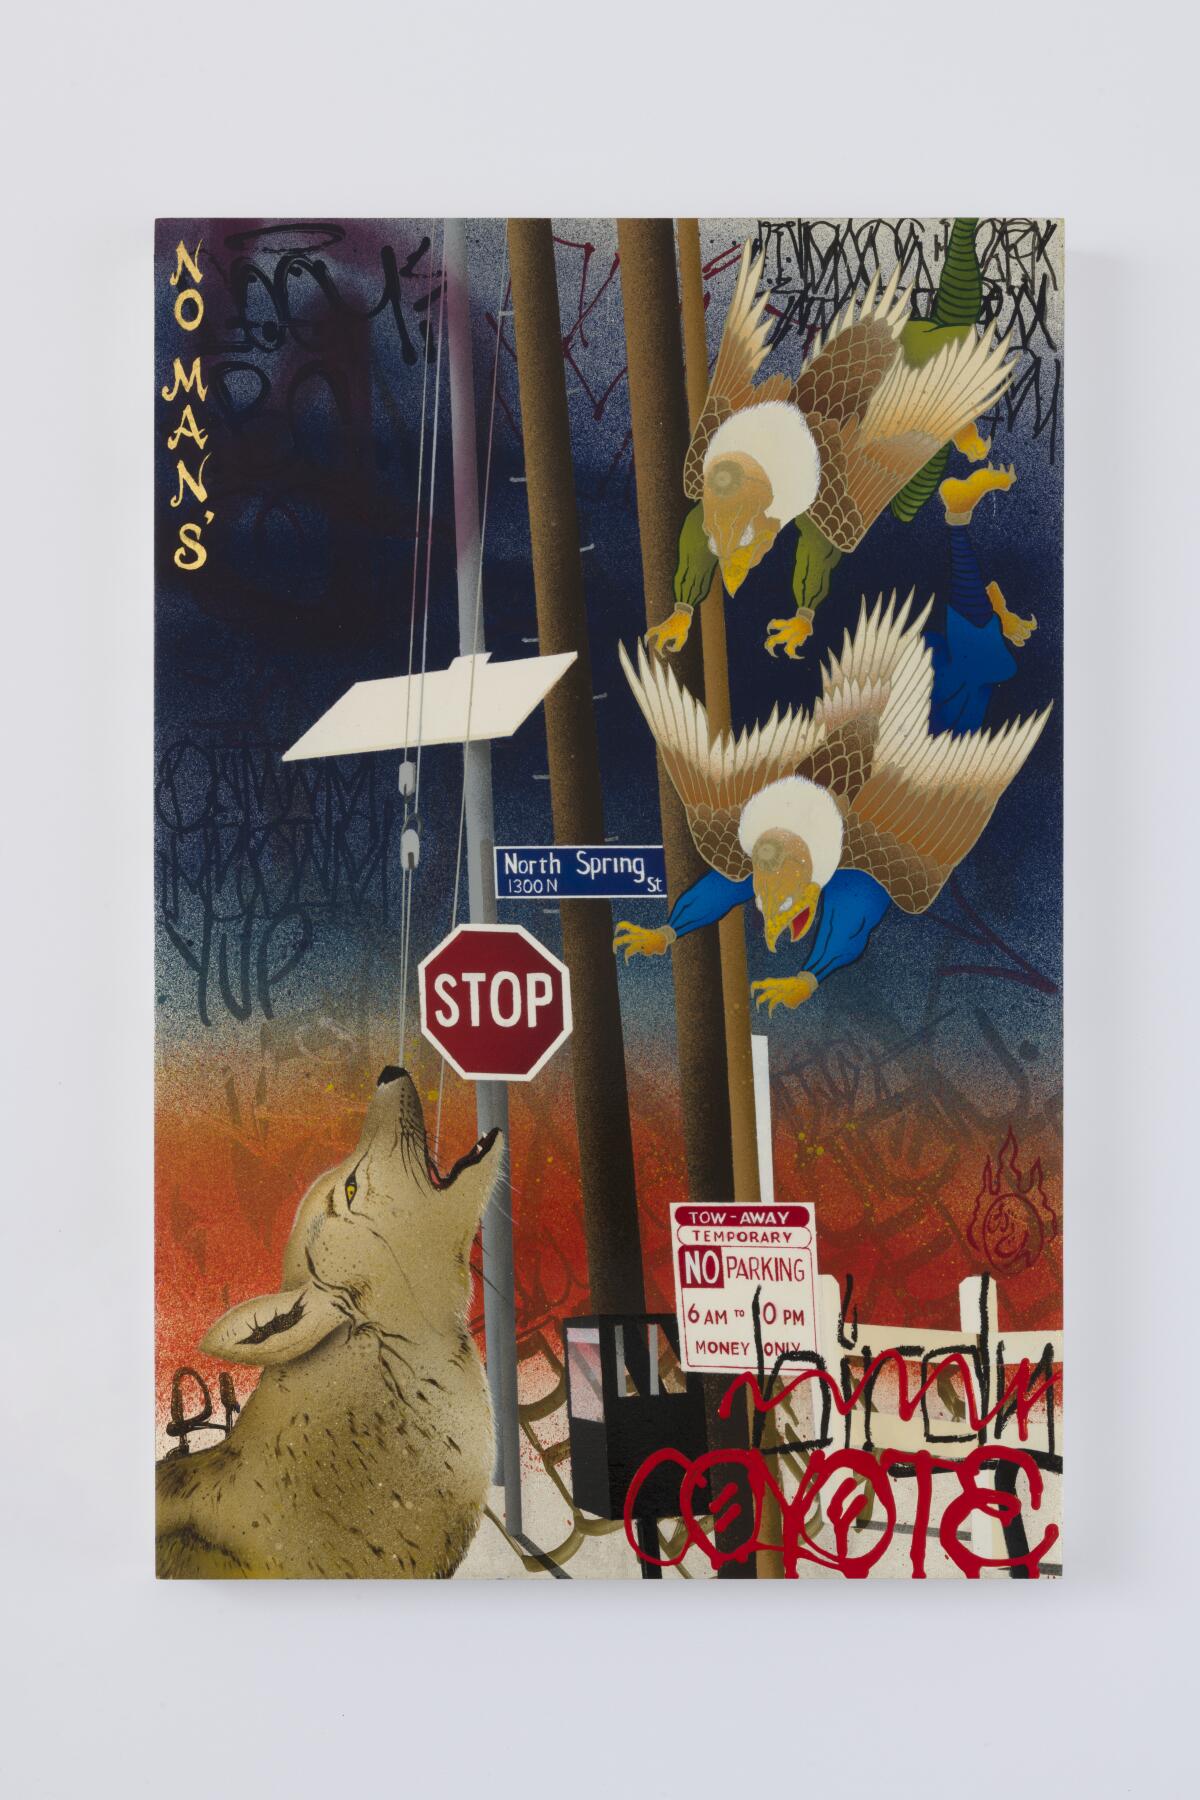 Gajin Fujita's work "No Mans LAnd" feature a howling coyote, a stop sign and graffiti